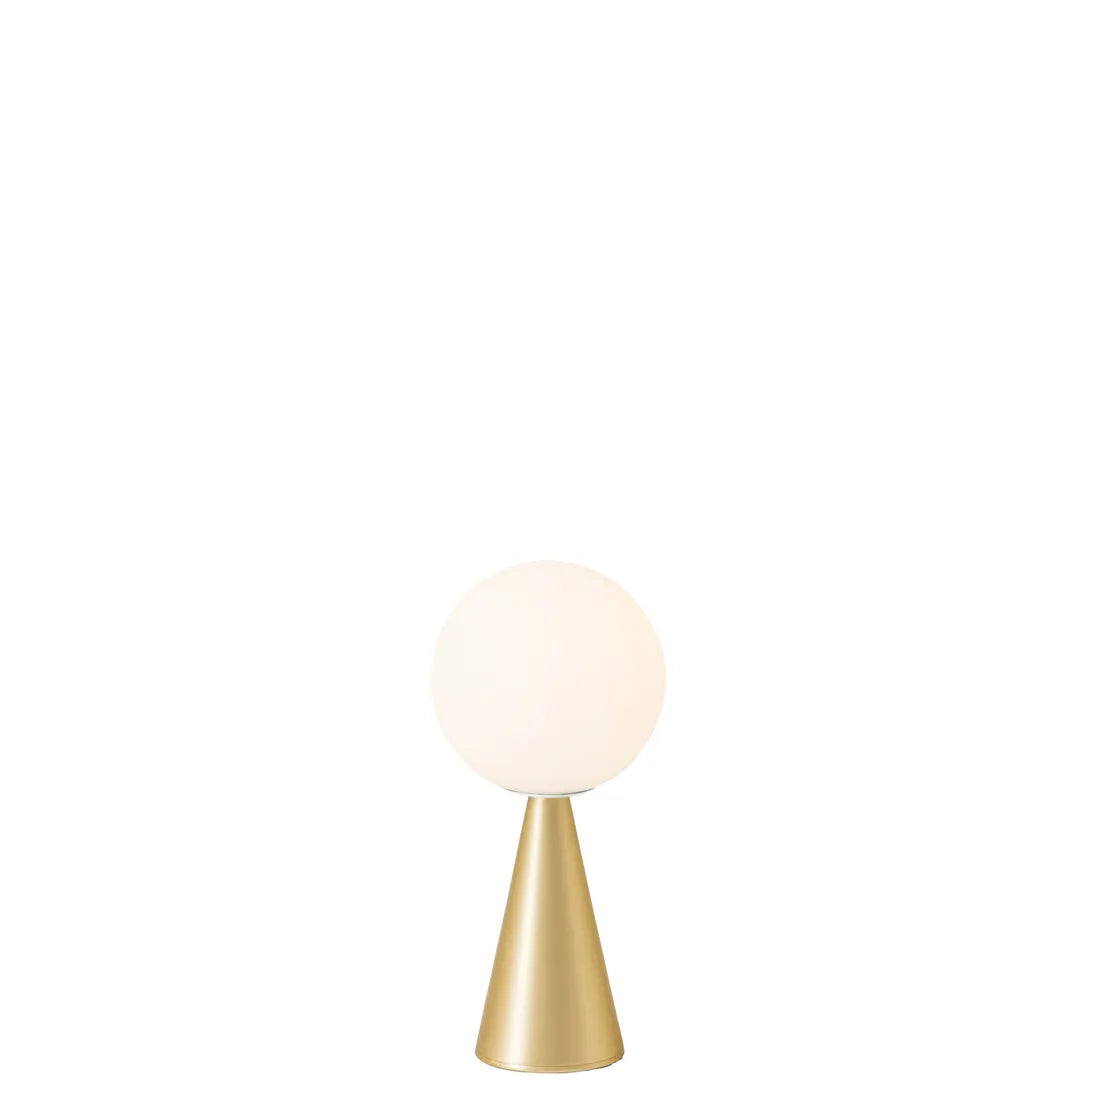 designer table lamps online, table lamps india, new mini lamps for dining table brass